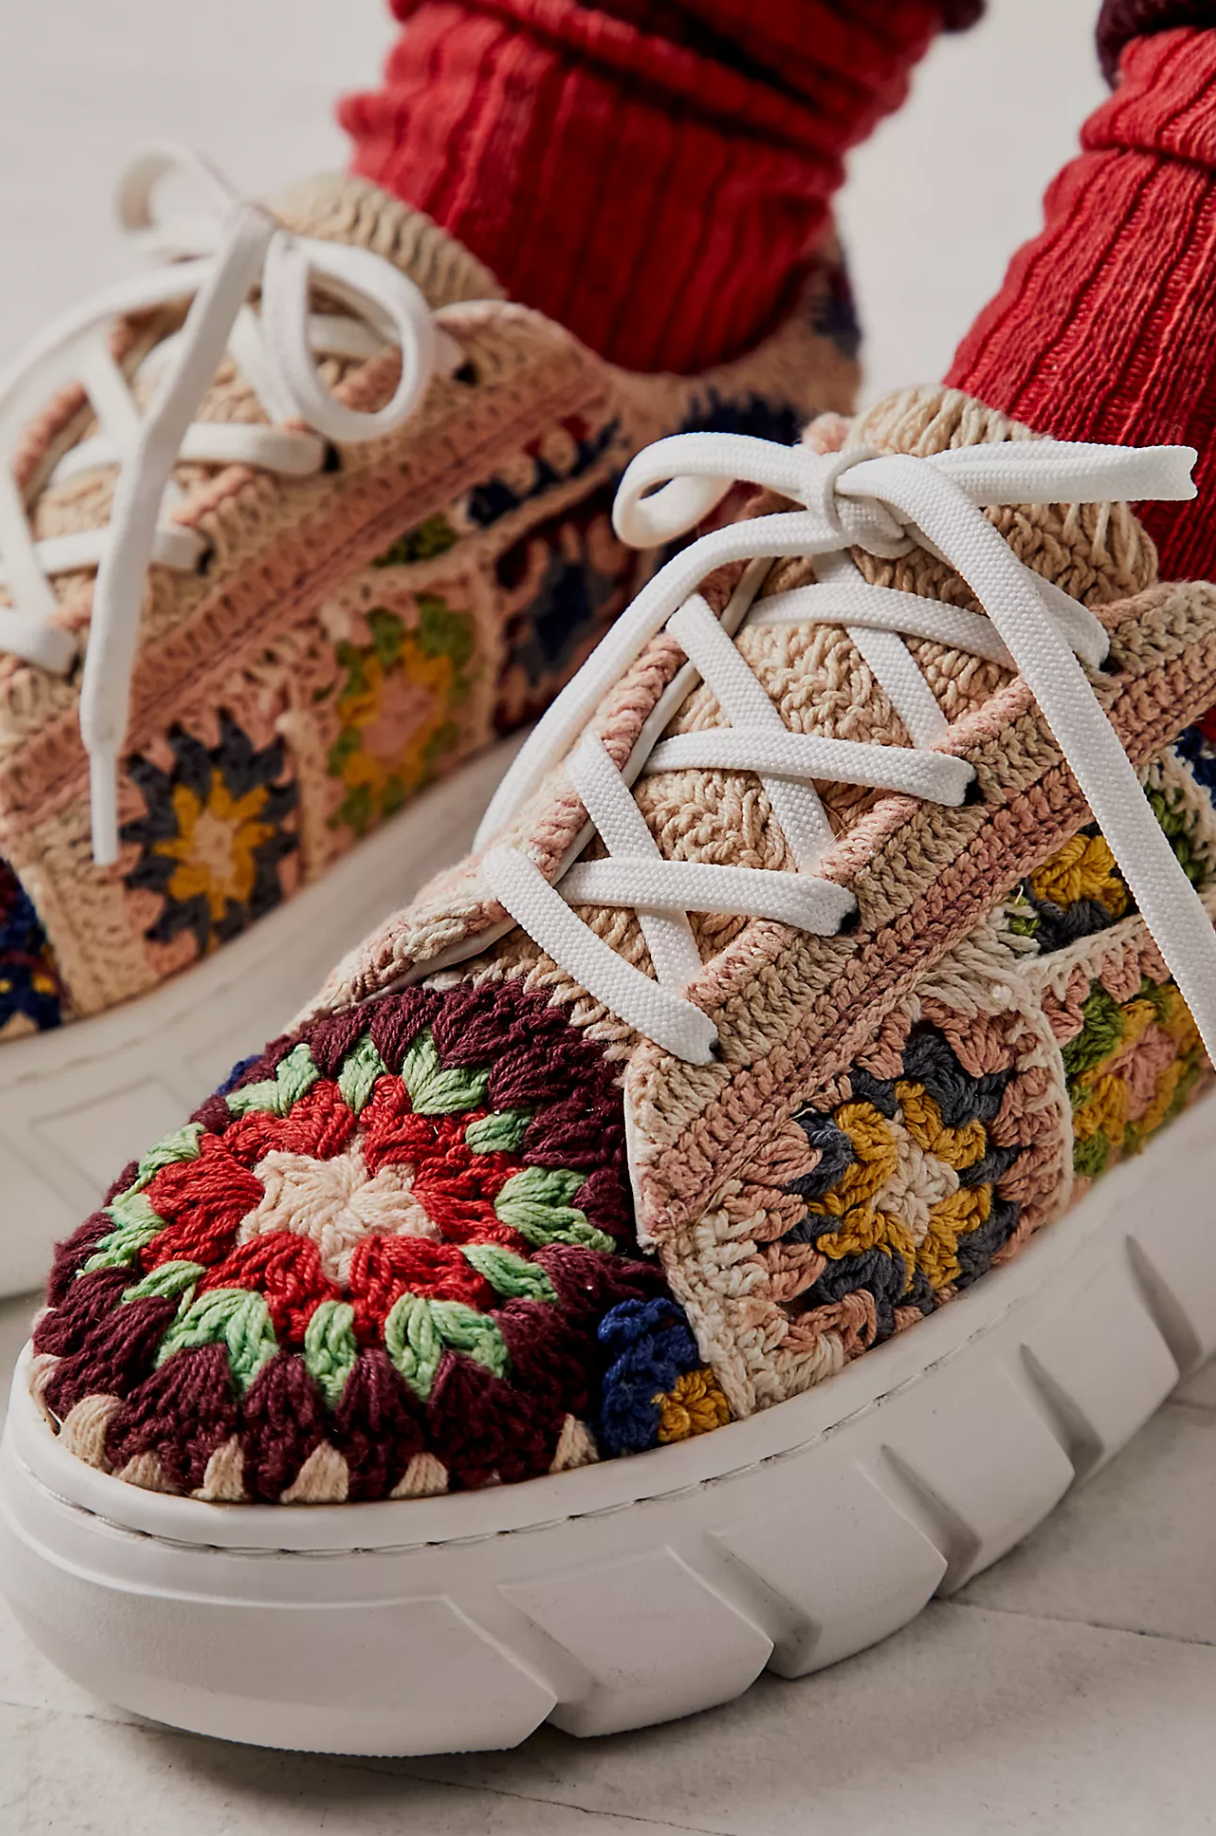 Catch Me If You Can Crochet Sneaker